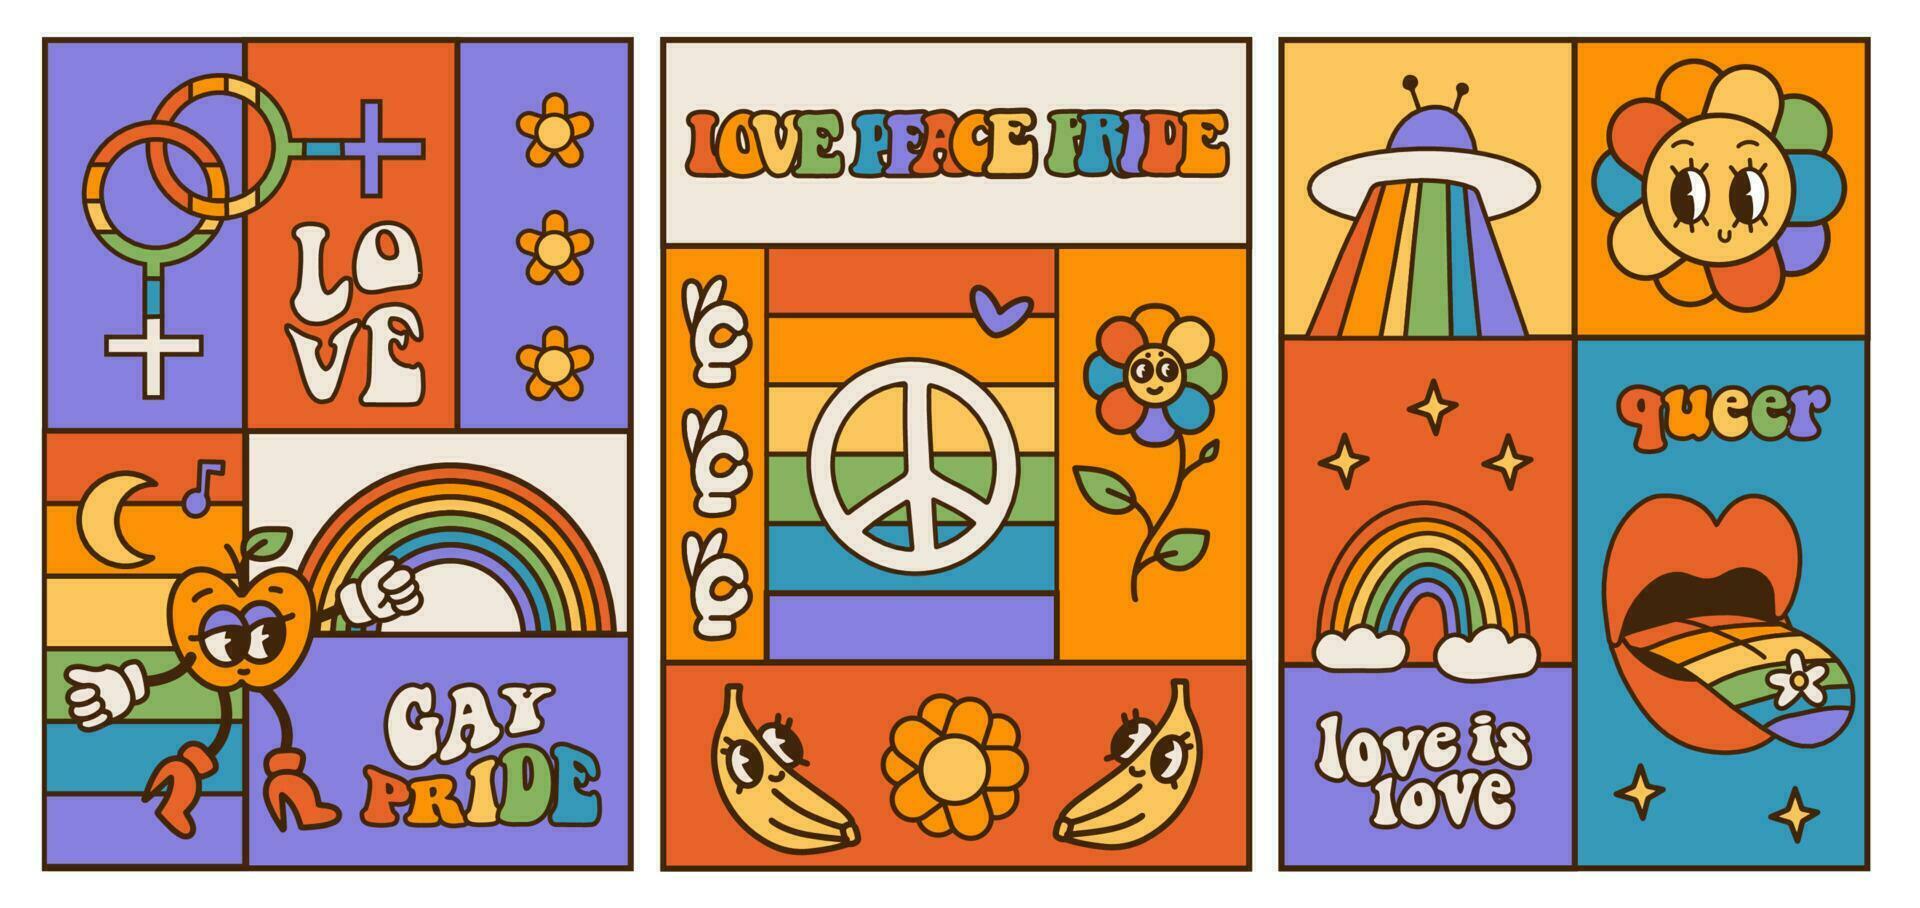 LGBT Pride Month Banners Collection with groovy queer slogans and phrase. Set of templates square designed with Rainbow colors and retro cartoon characters for LGBT Pride Month. Vector illustration.